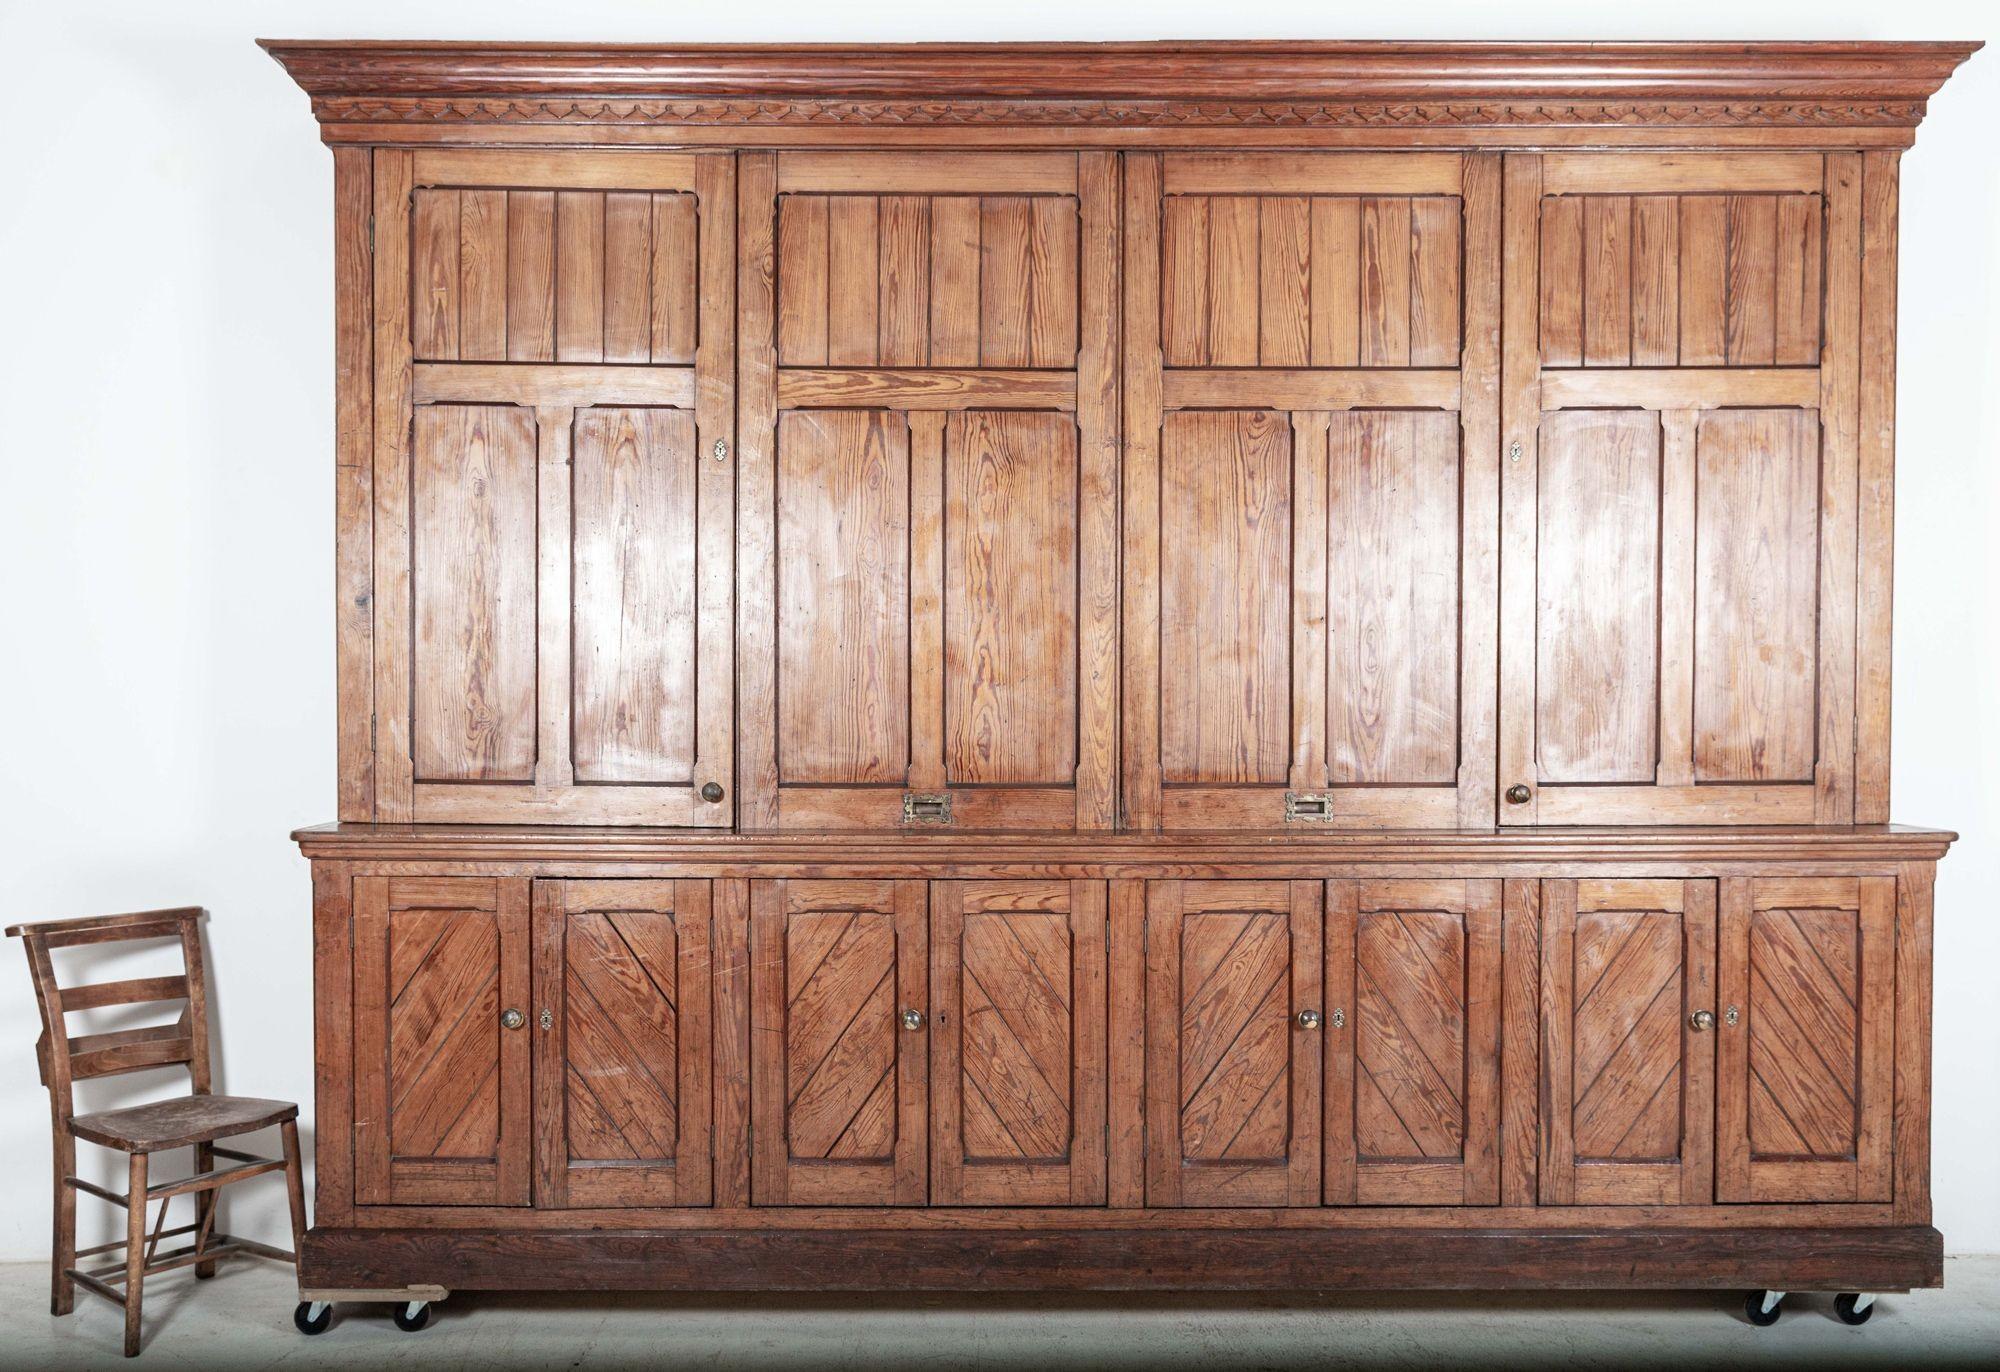 Circa 1870

Monumental 19thC English Pine Housekeepers Cupboard/ With two panelled central sliding doors, 2 outer hinged doors to the top cabinet and 8 Panelled doors to the base cabinet.

Two pieces top and base cabinet.

(Signs of past repairs to